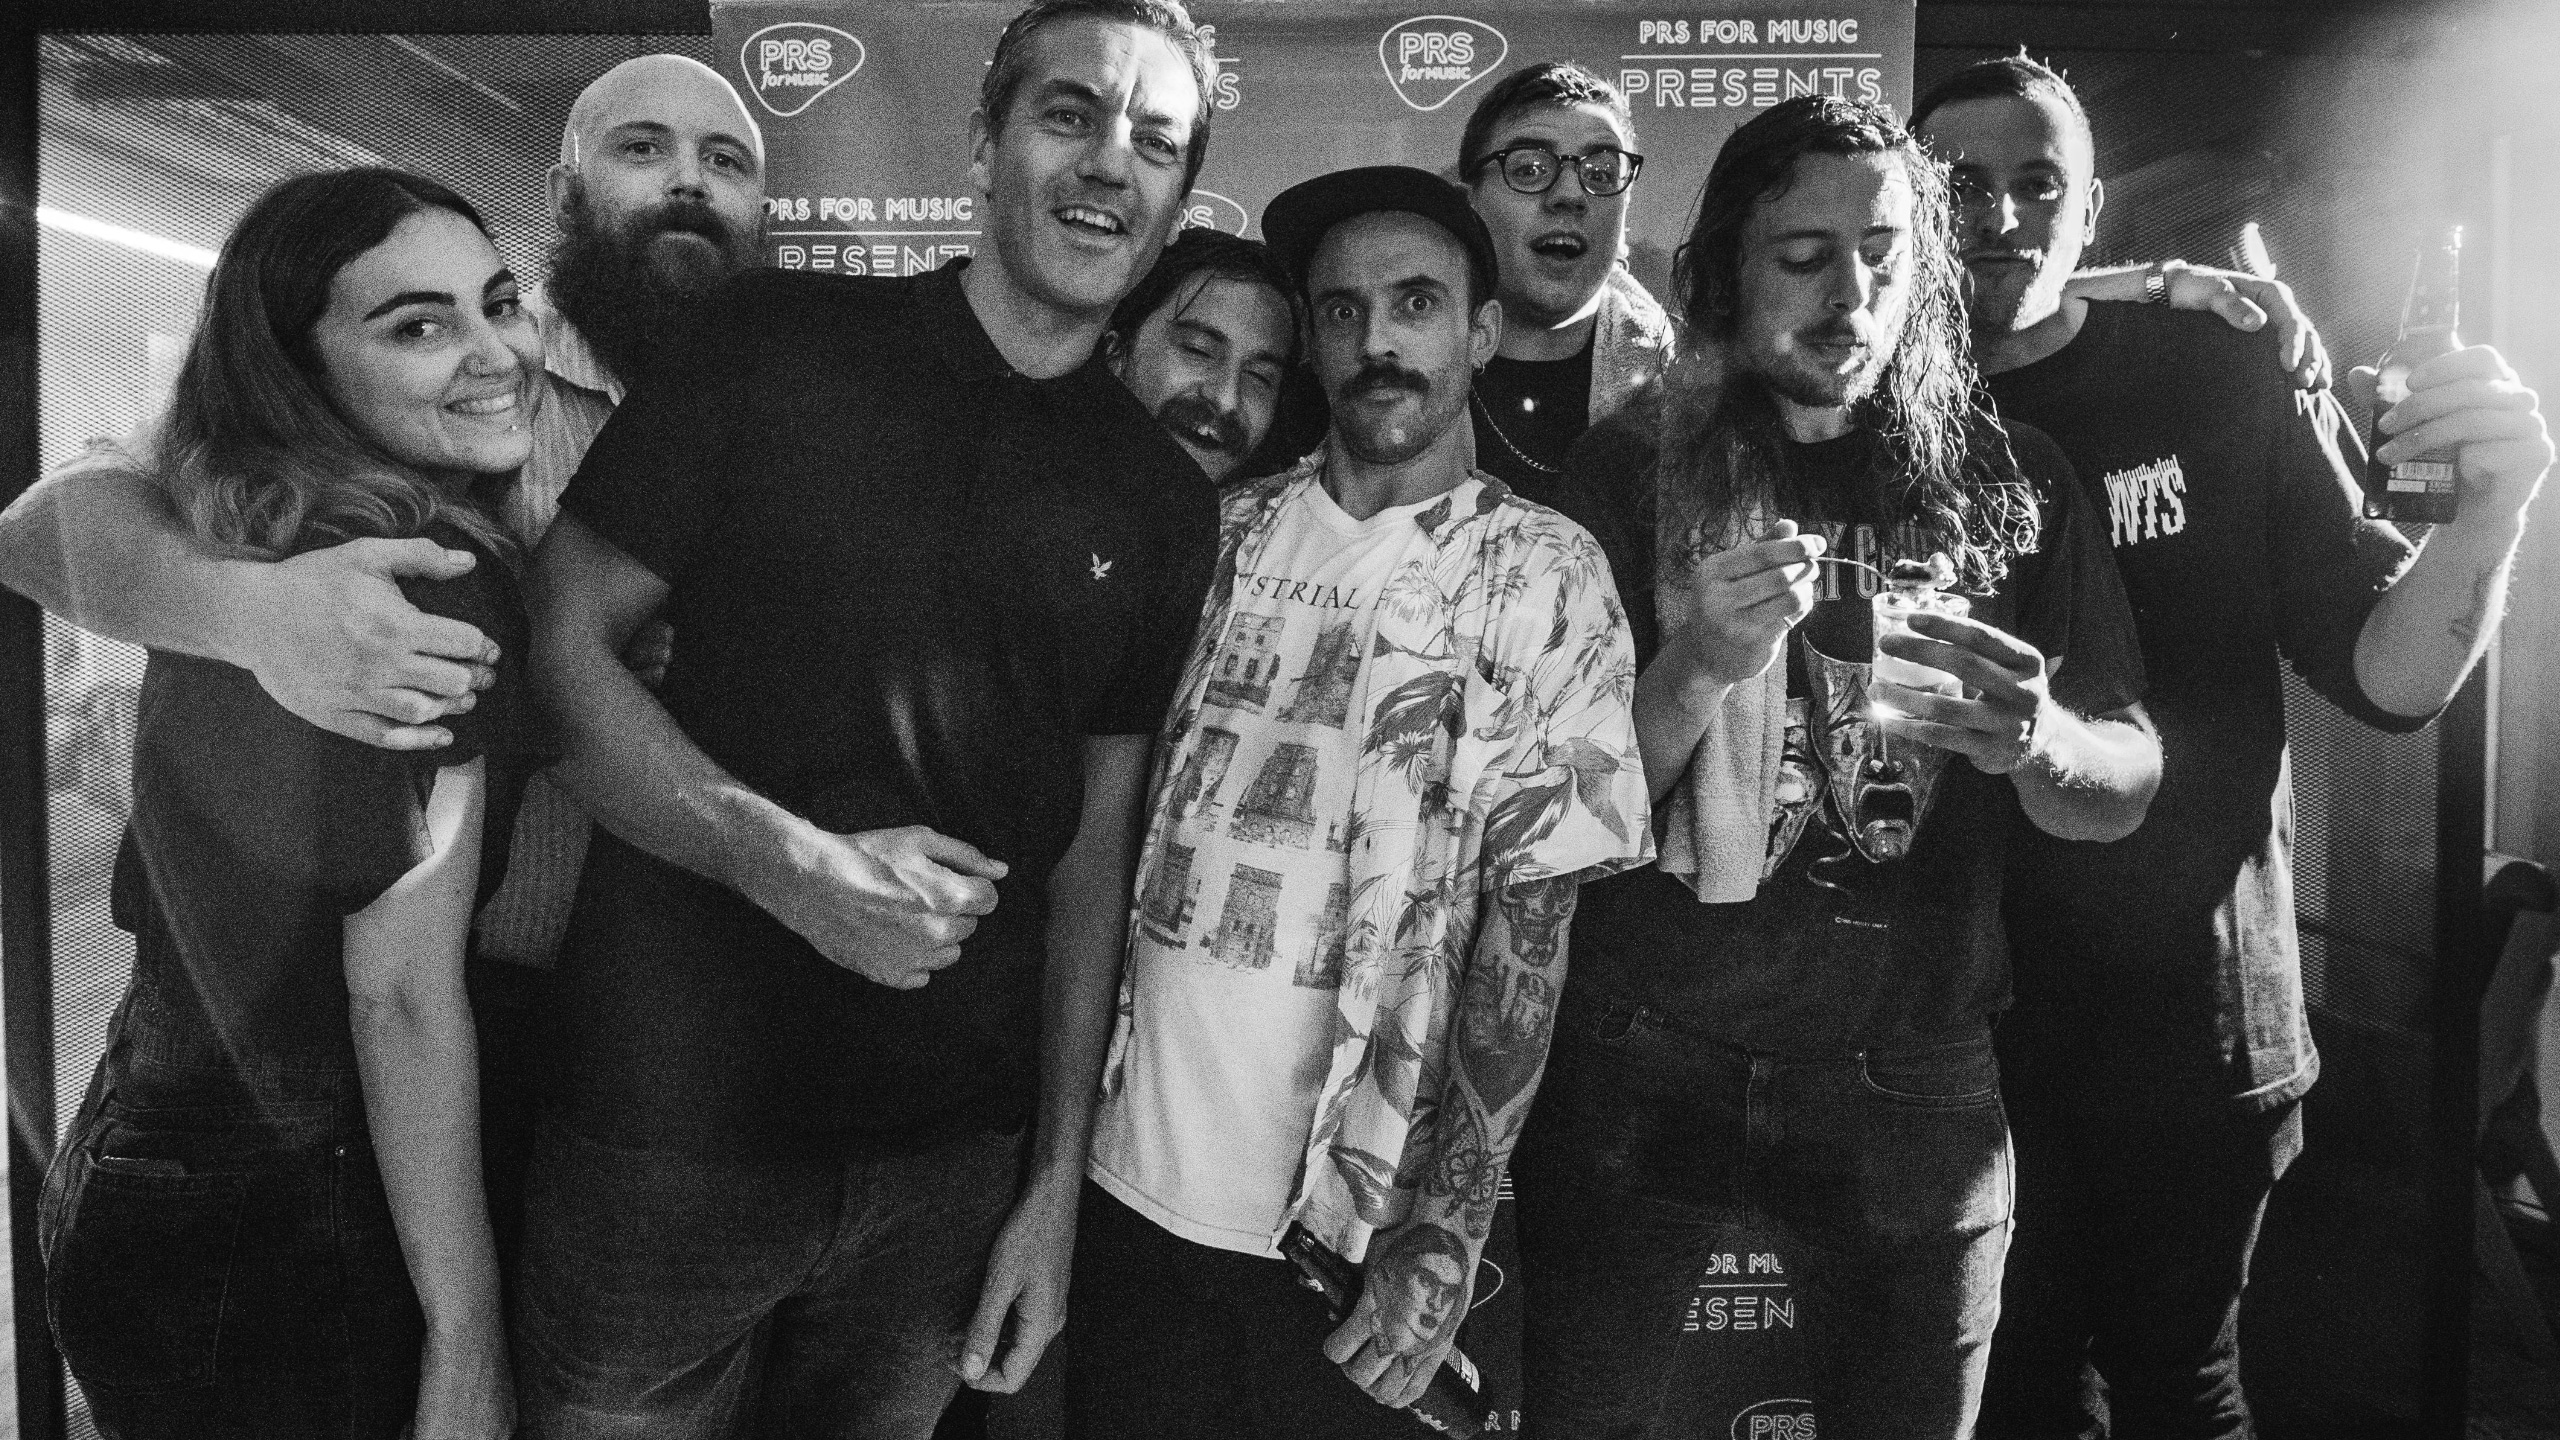 Idles with PRS for Music's Amy Field, Paul Sims and David Bargery